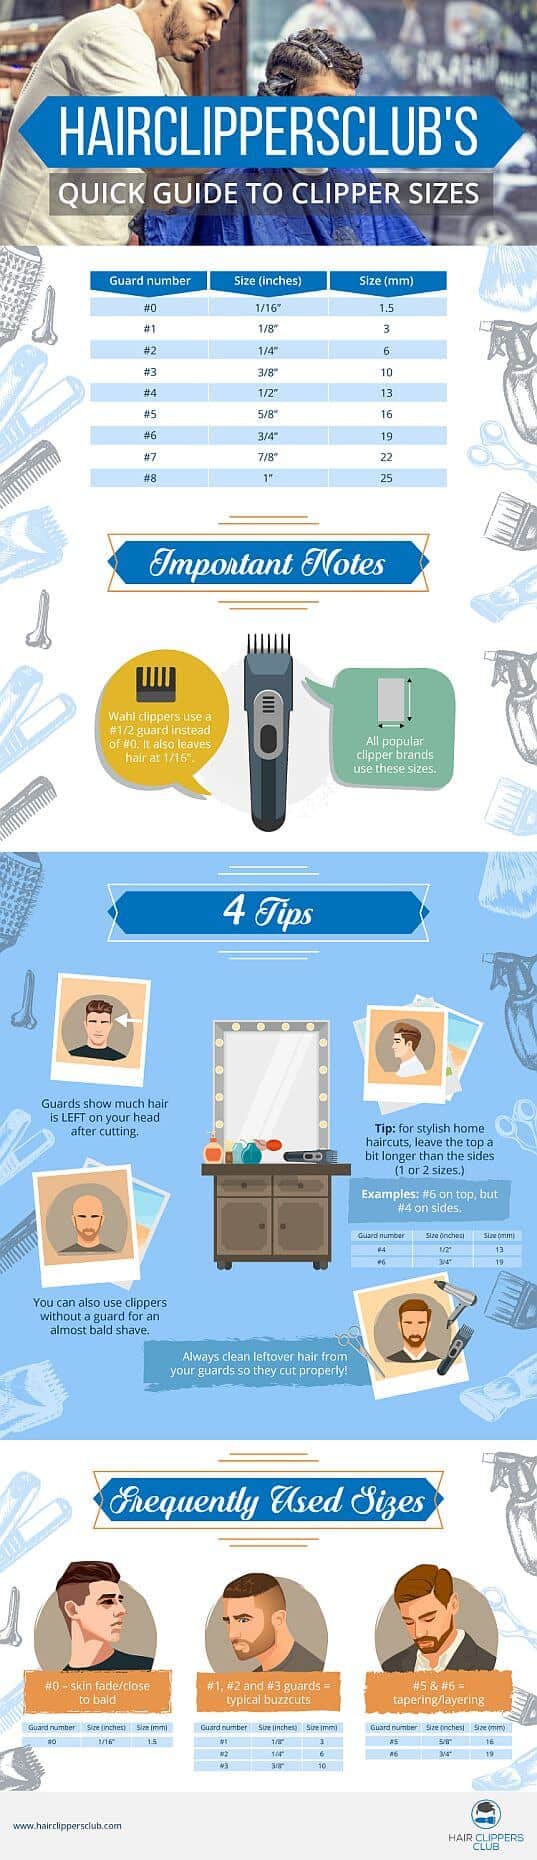 Definite Guide To Hair Clipper Sizes - HairClippersClub